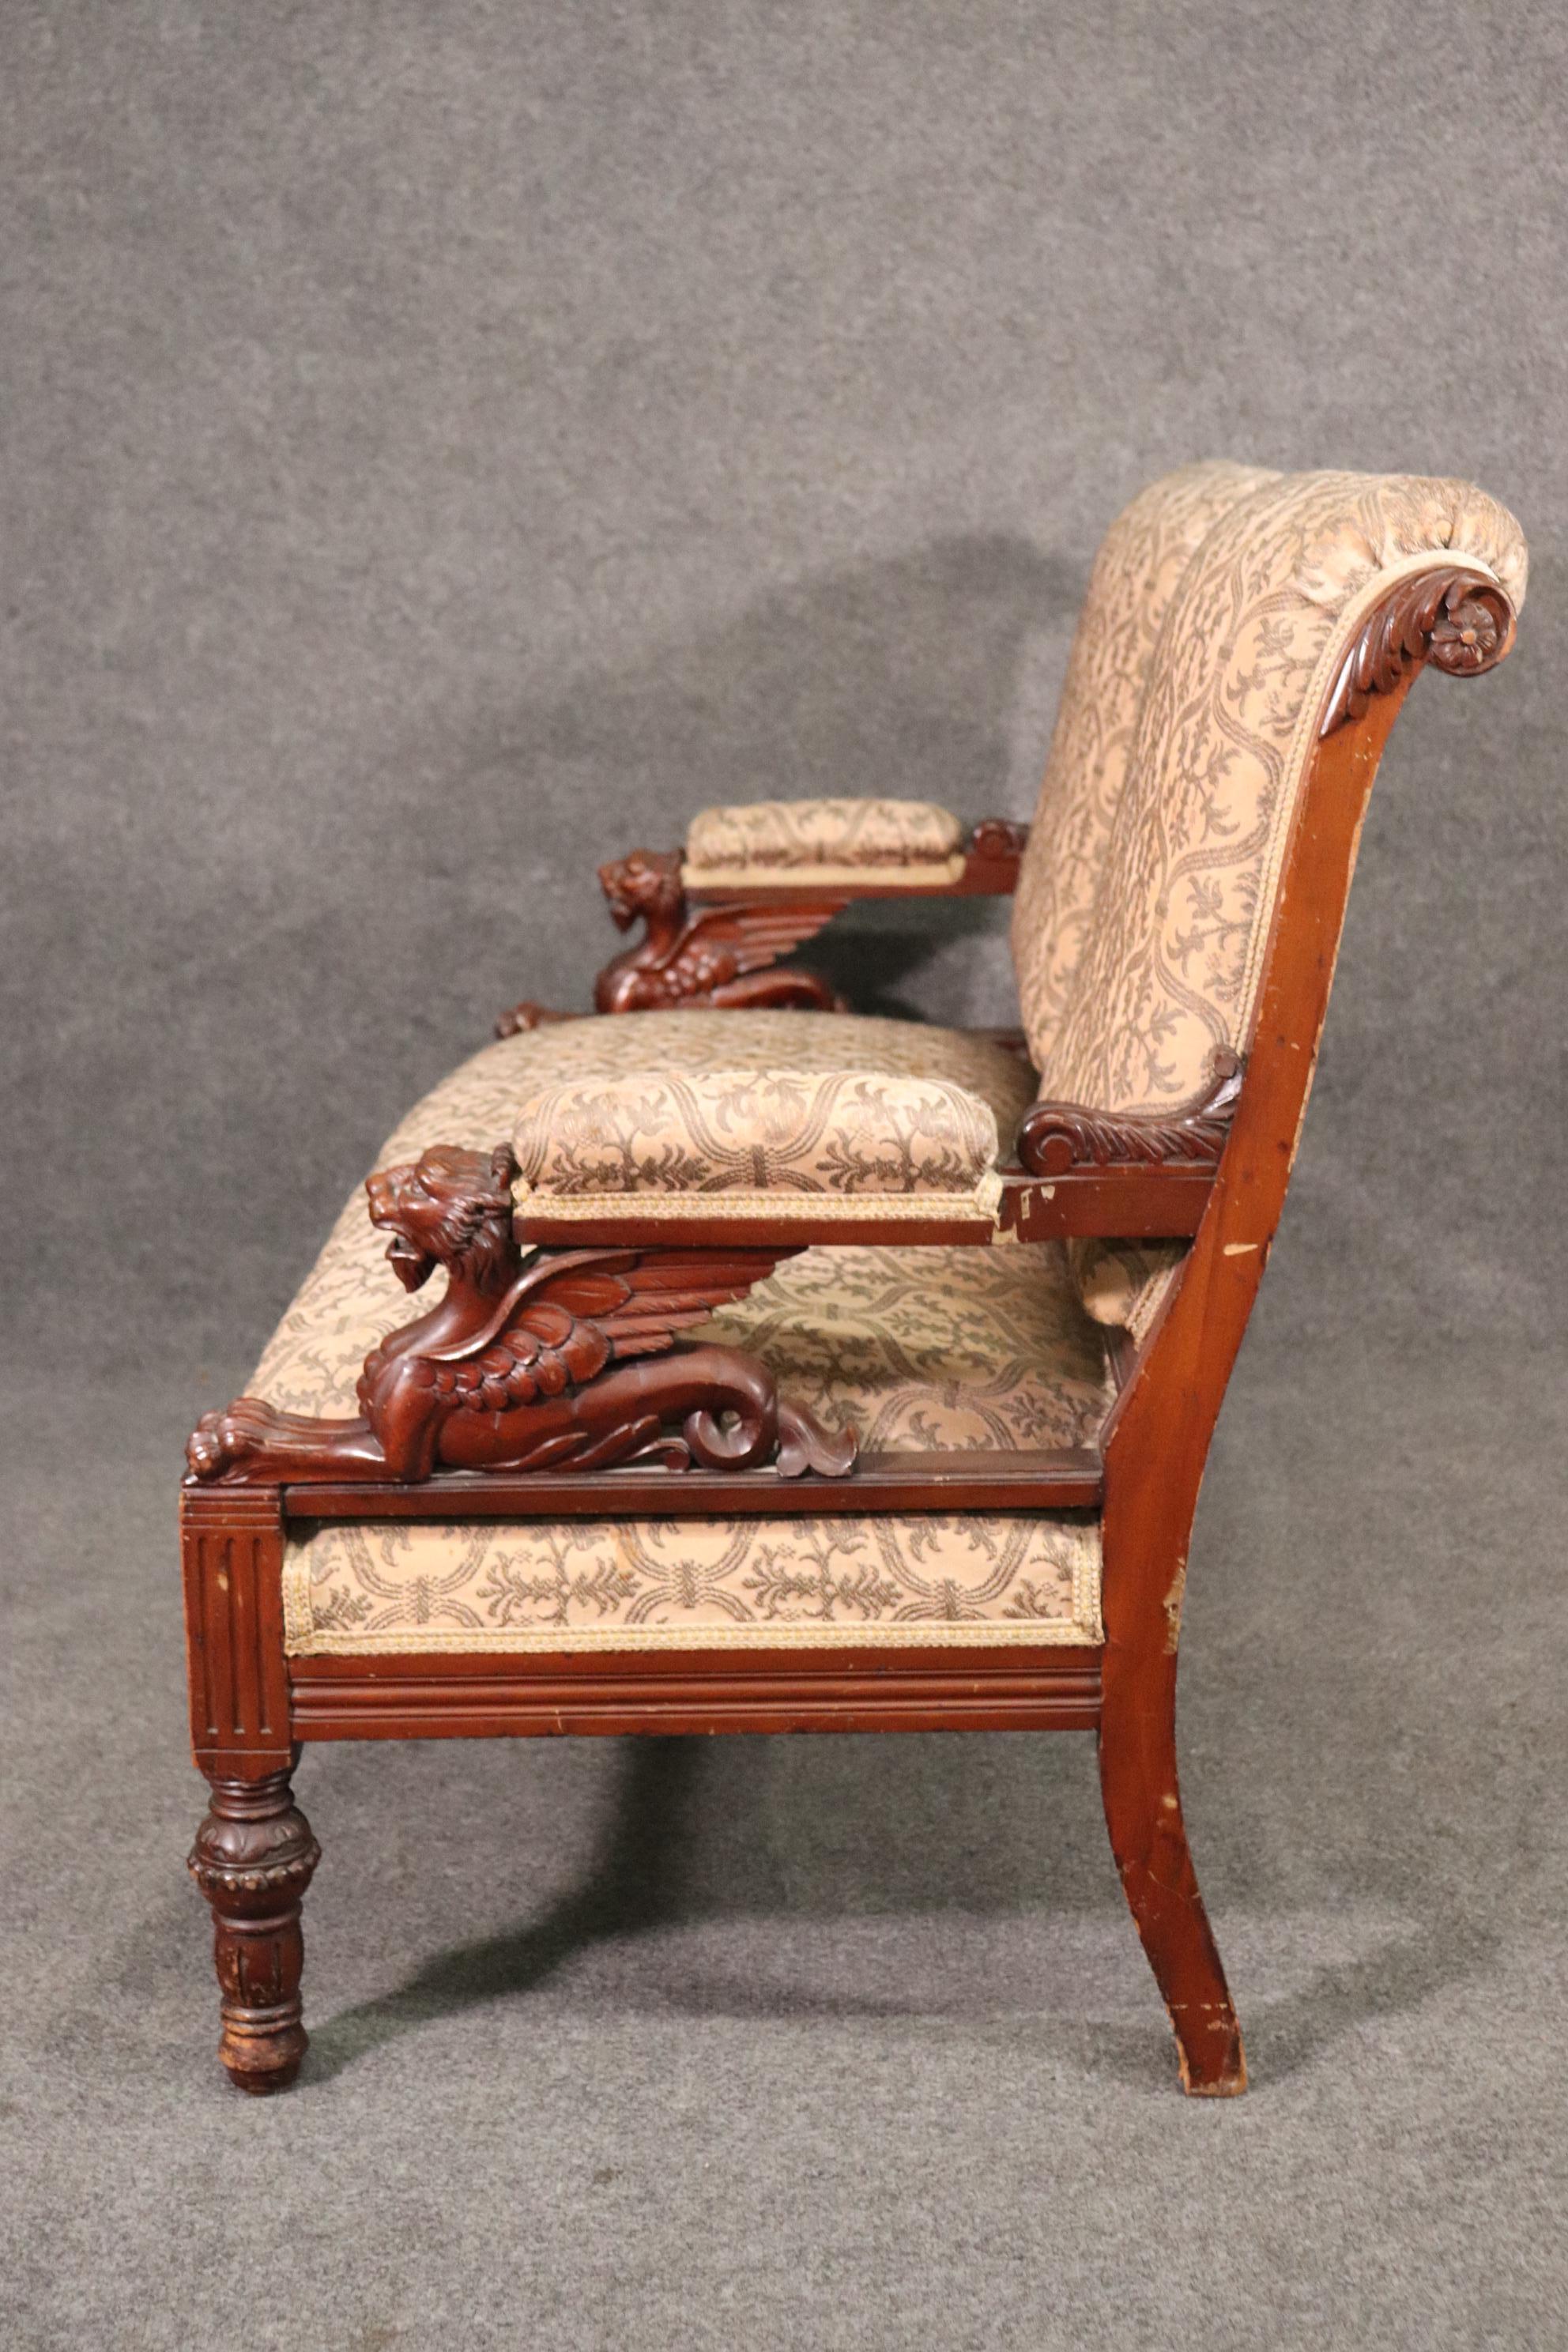 Late 19th Century Rare Carved Walnut RJ Horner Winged Griffin Sofa Settee Circa 1870